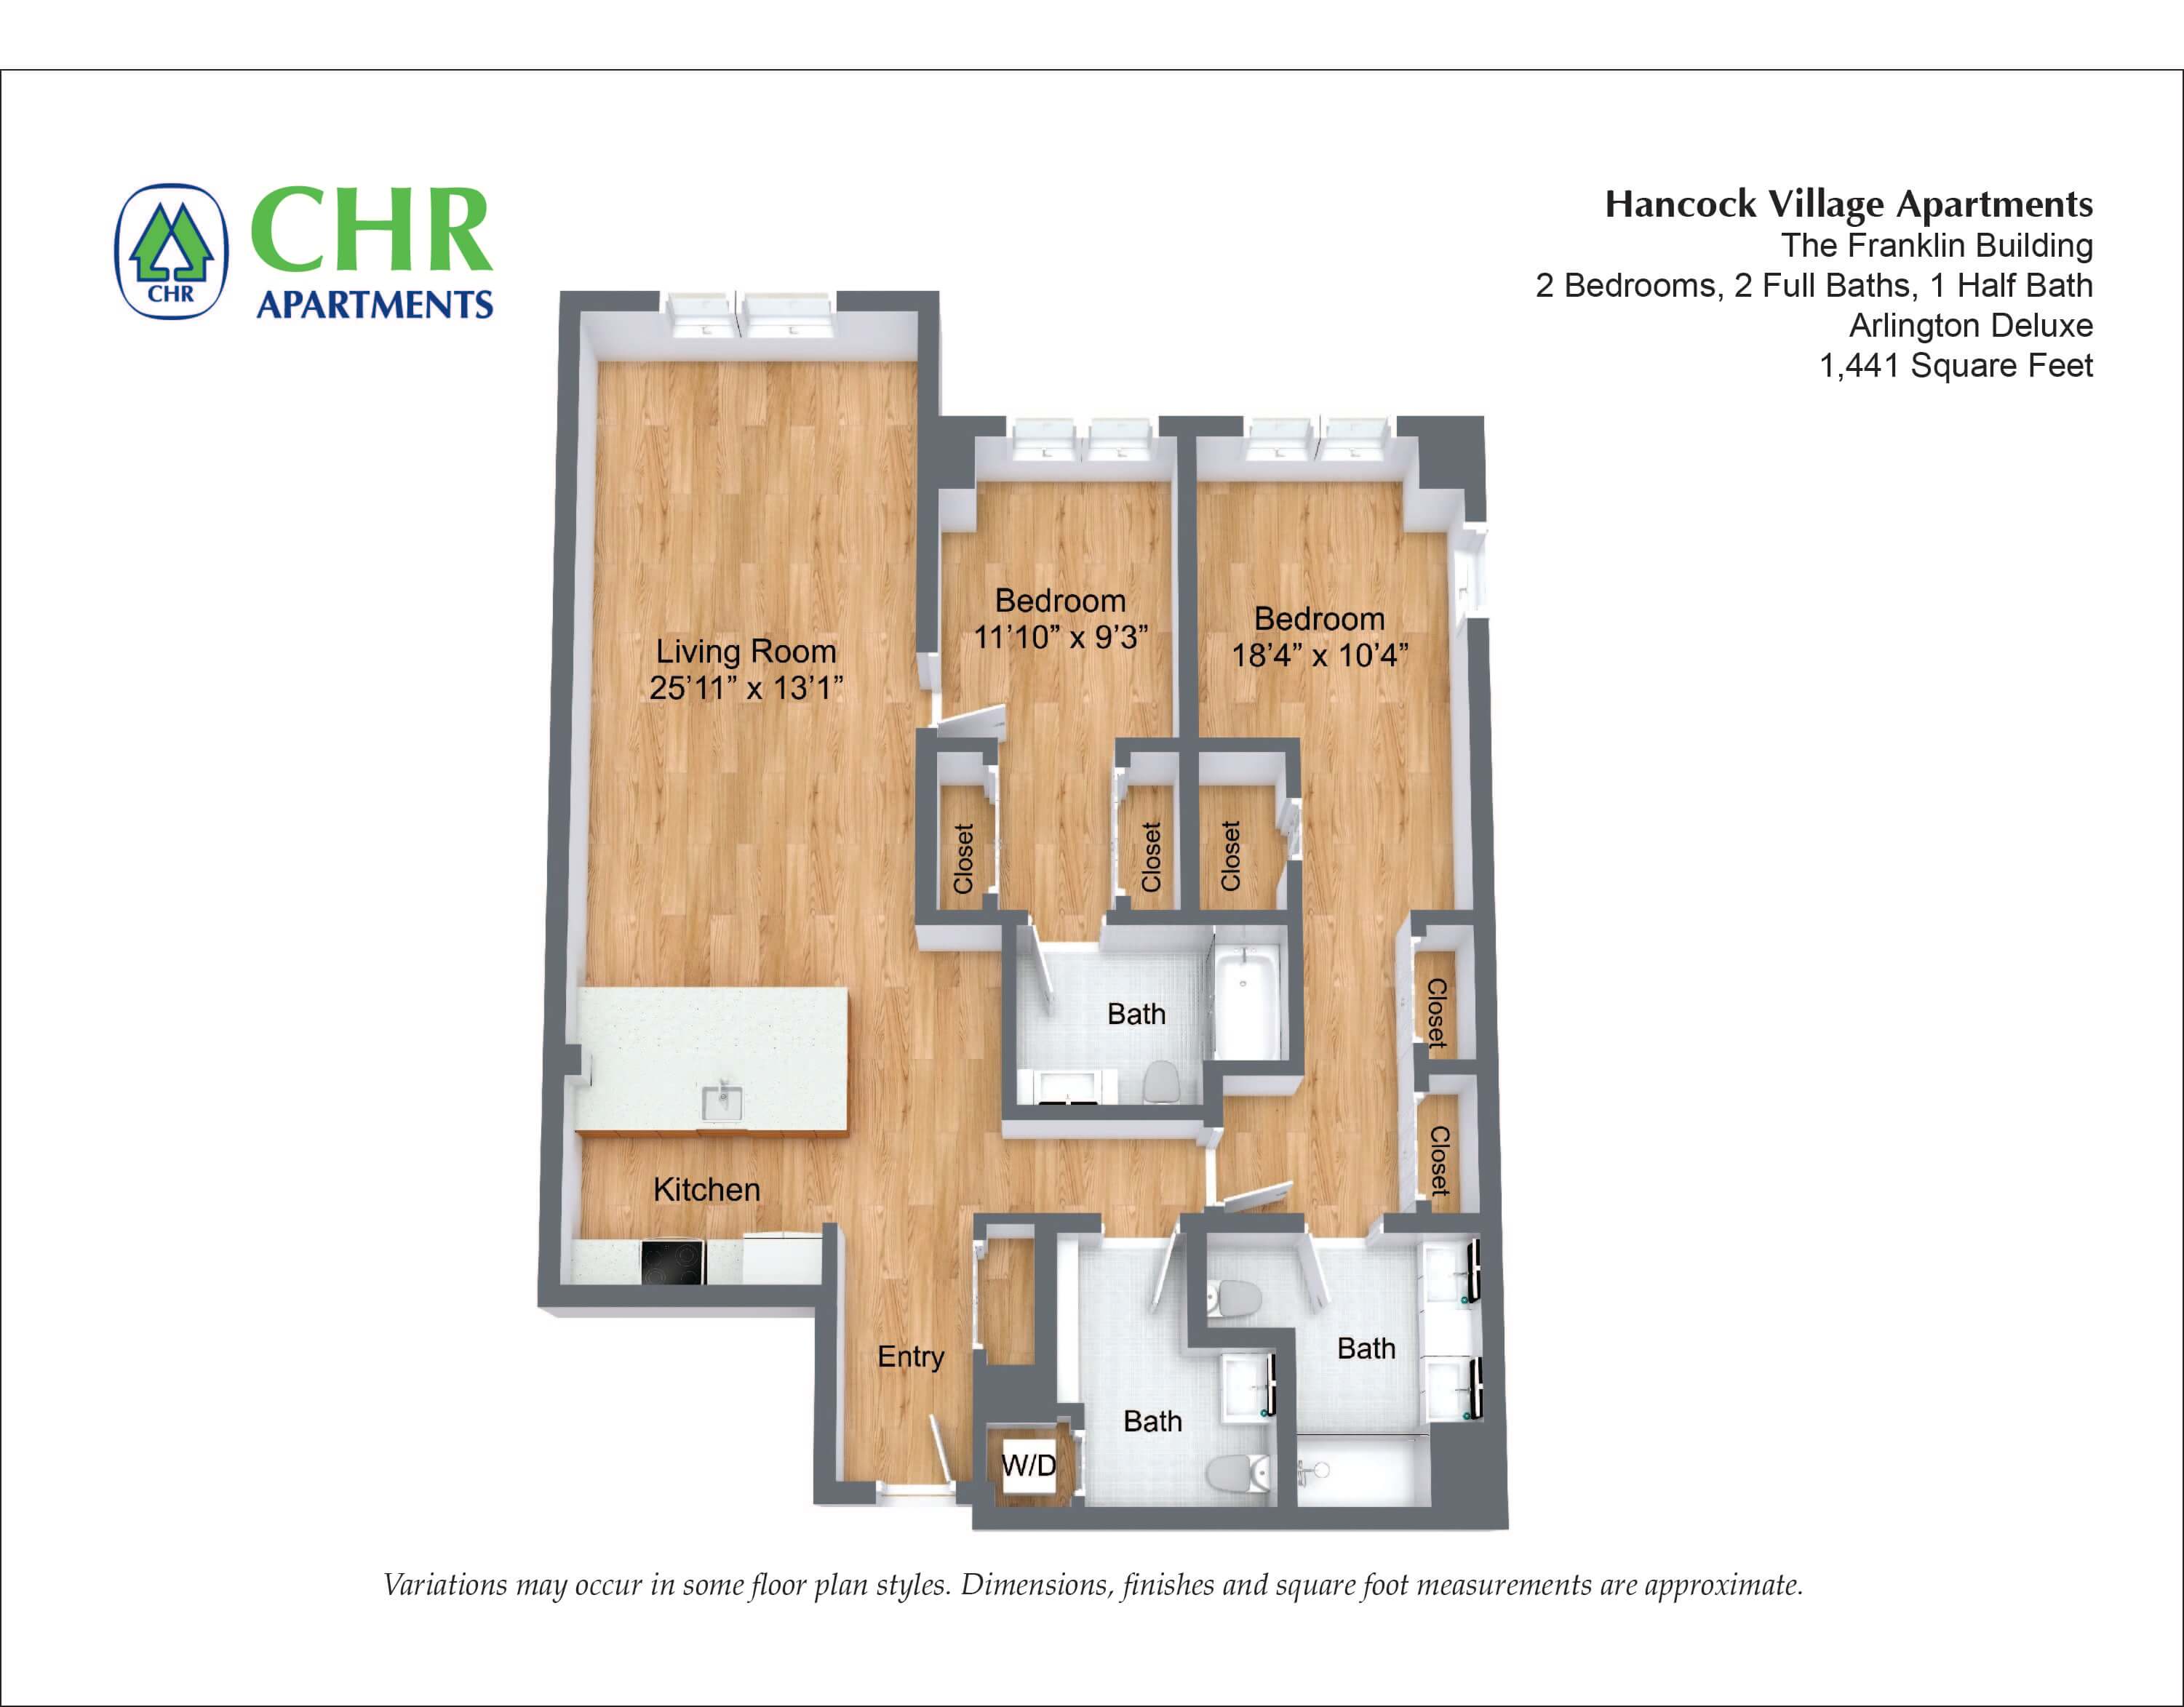 Click to view 2 Bed/2.5 Bath floor plan gallery